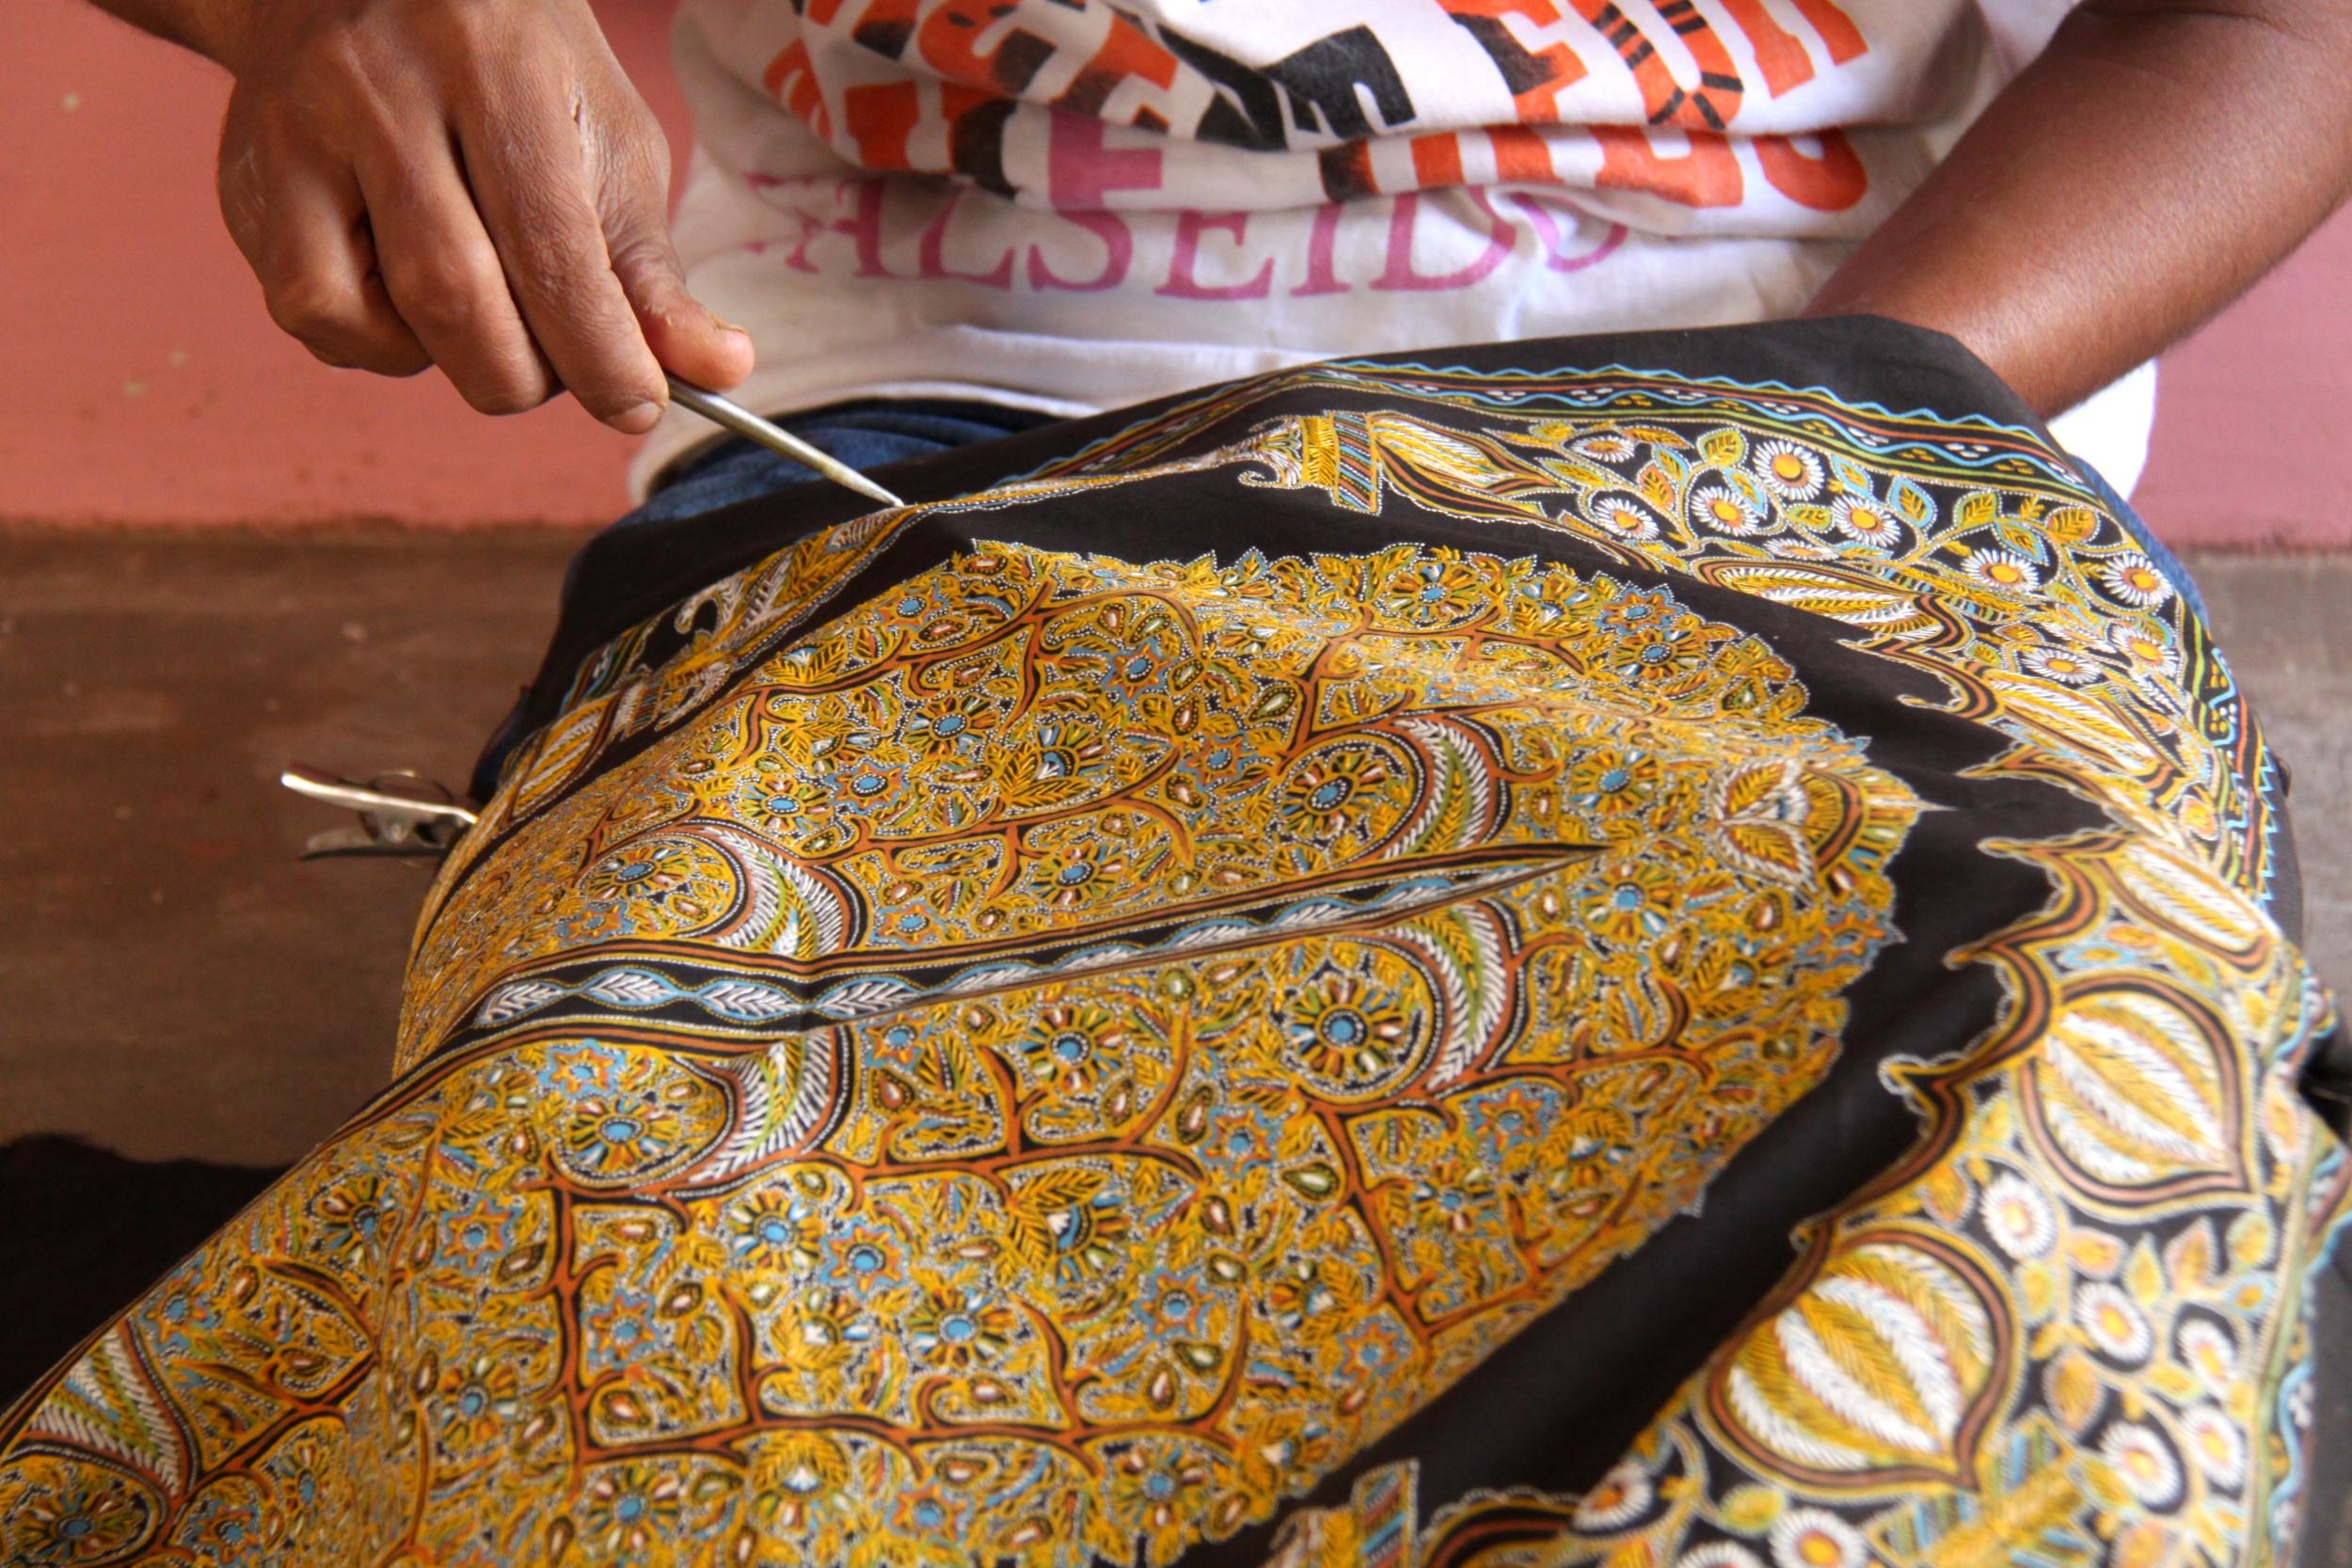 India’s ‘rogan’ art is dying, with only a single family in Kutch left practising it